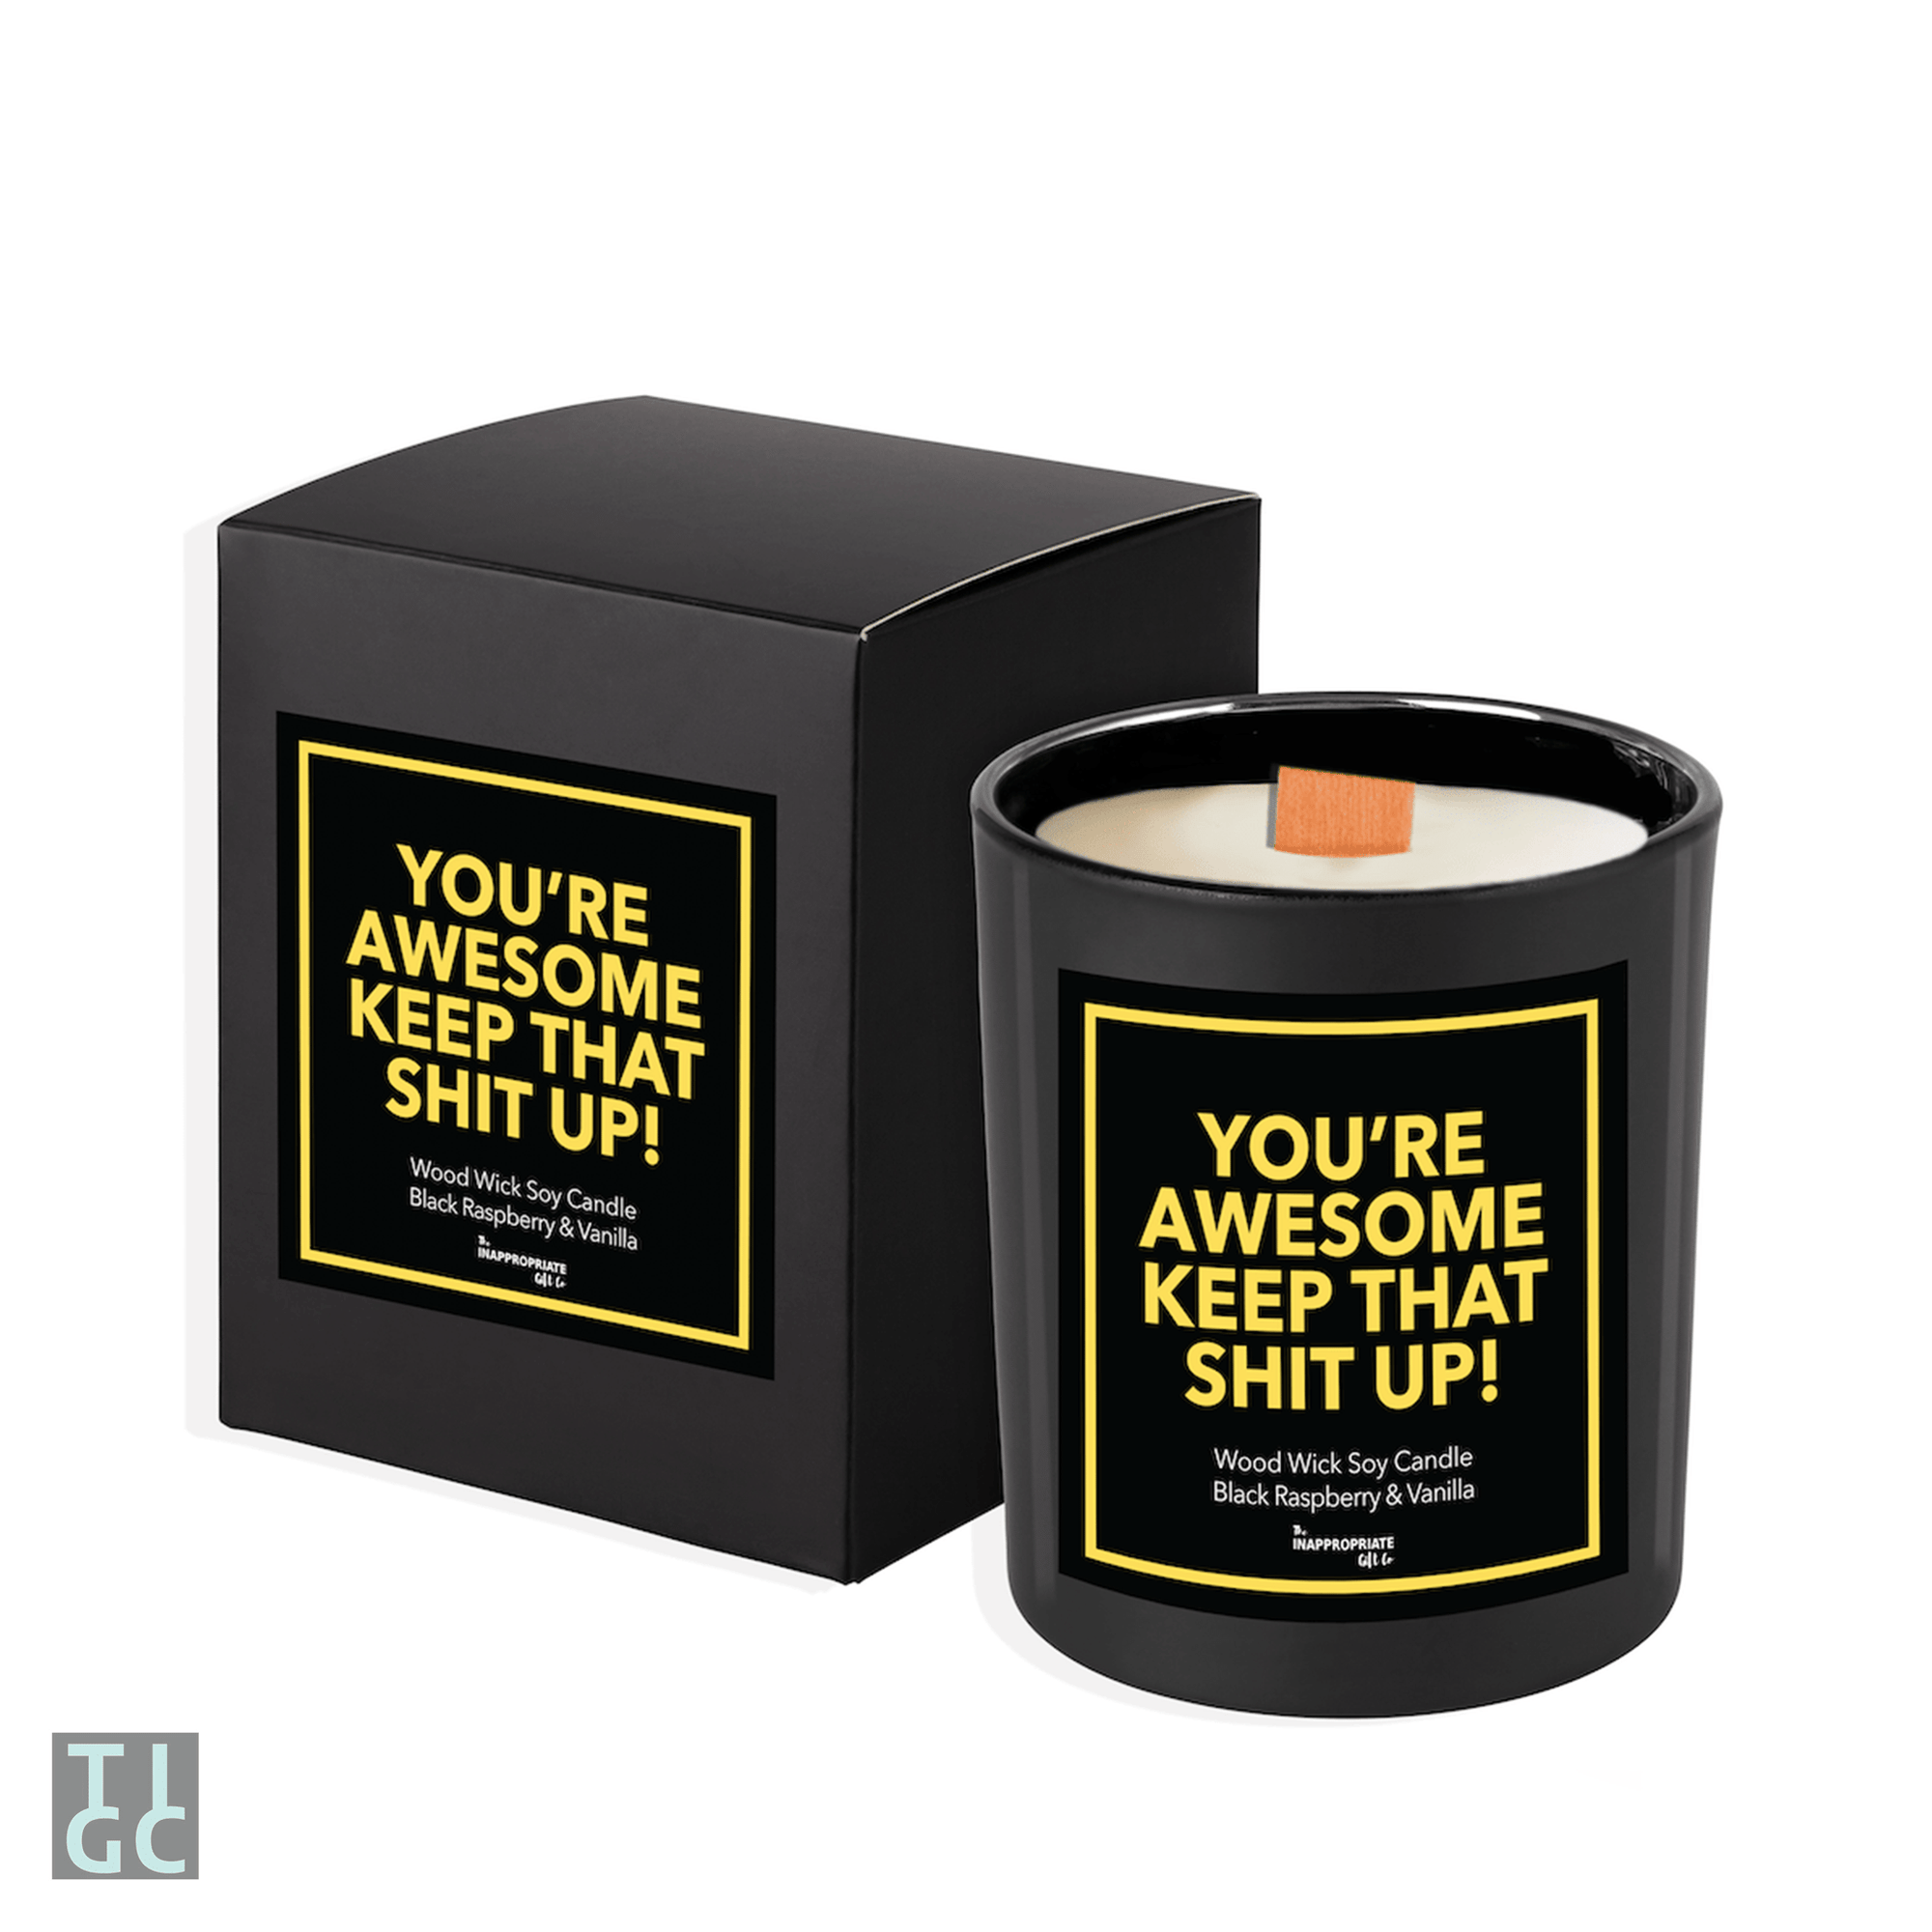 TIGC The Inappropriate Gift Co You're awesome keep that shit up candle